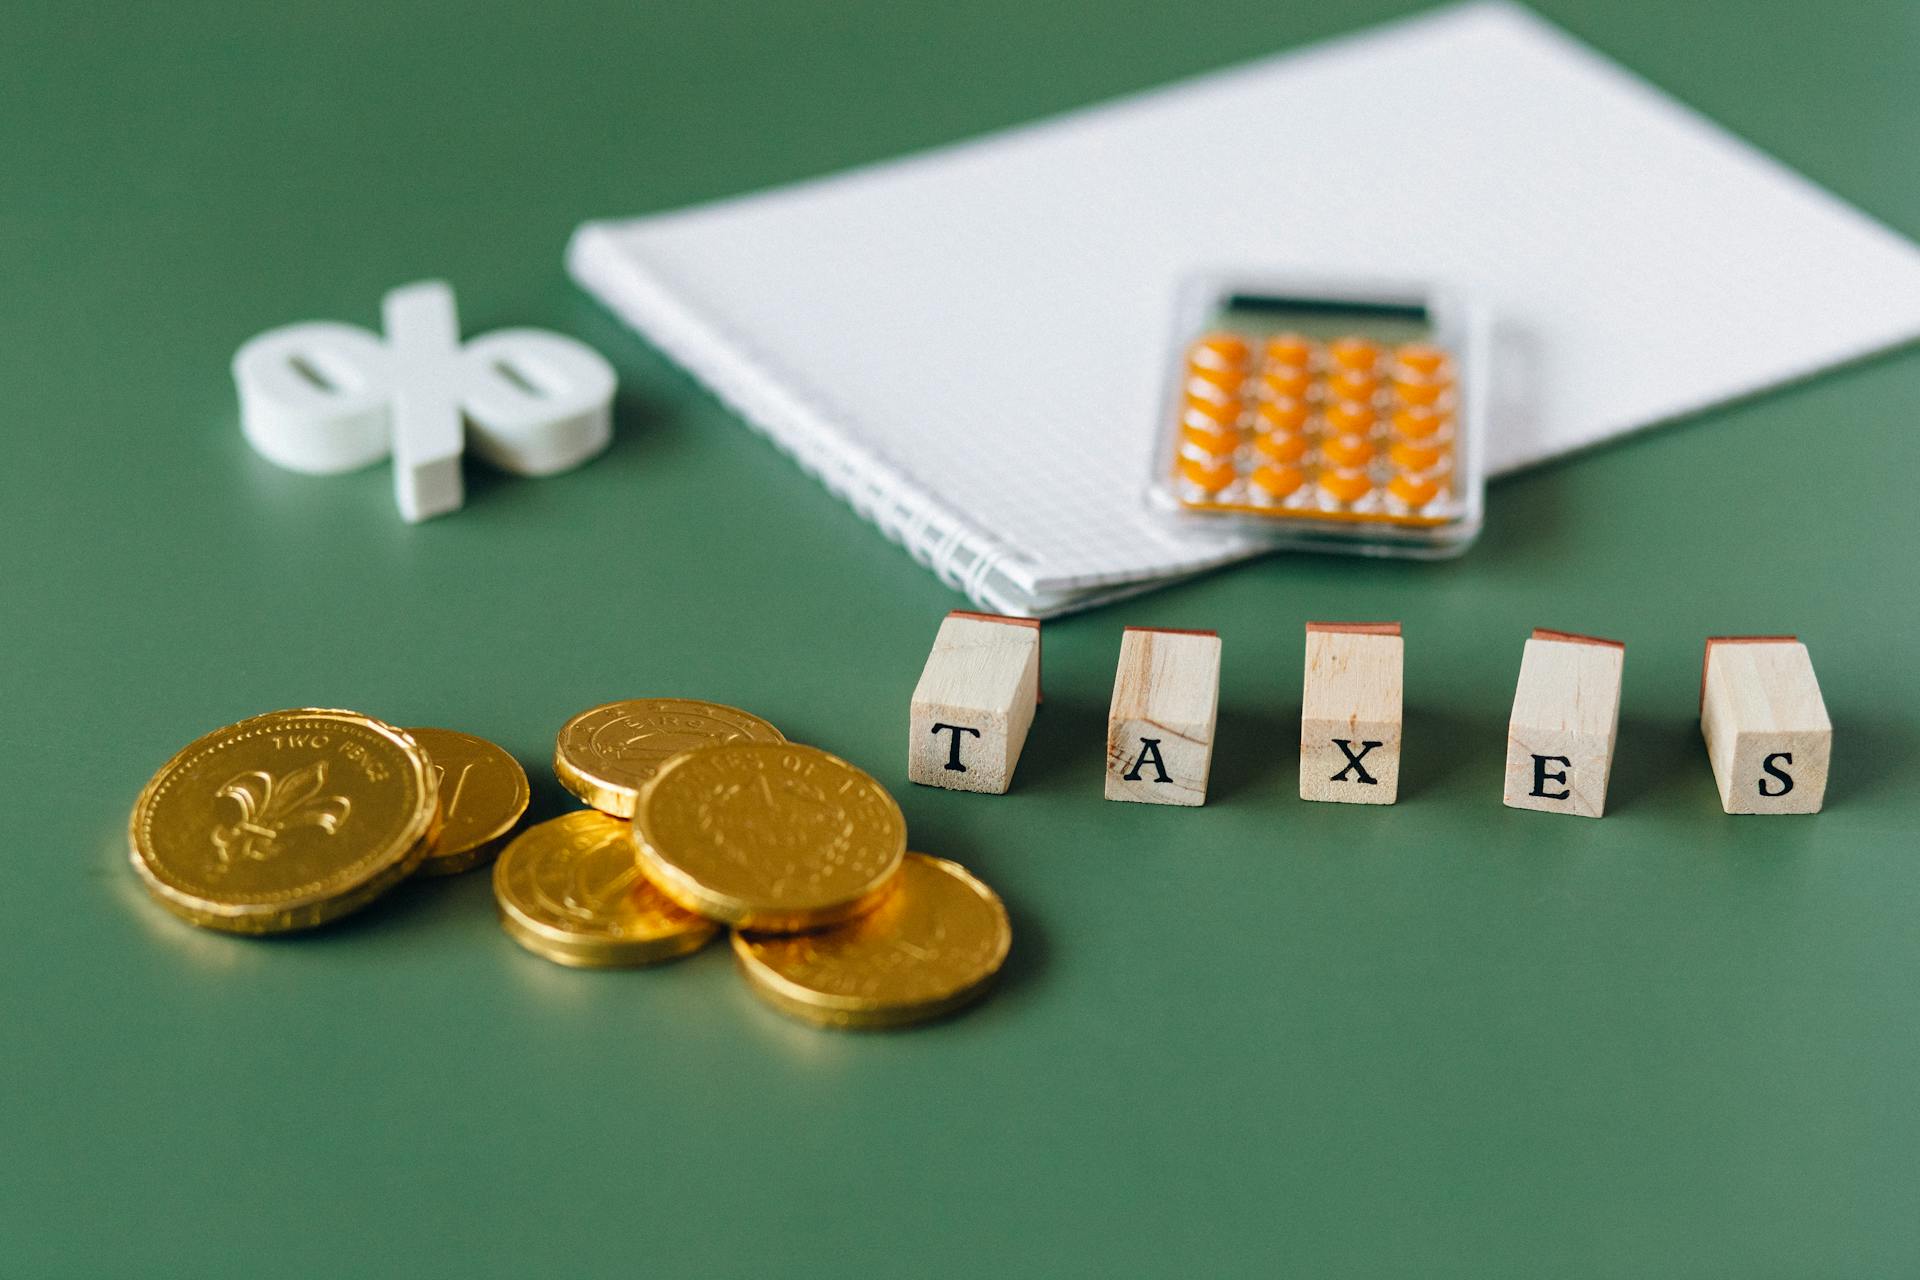 Gold Coins on Green Surface with the word "TAXES"